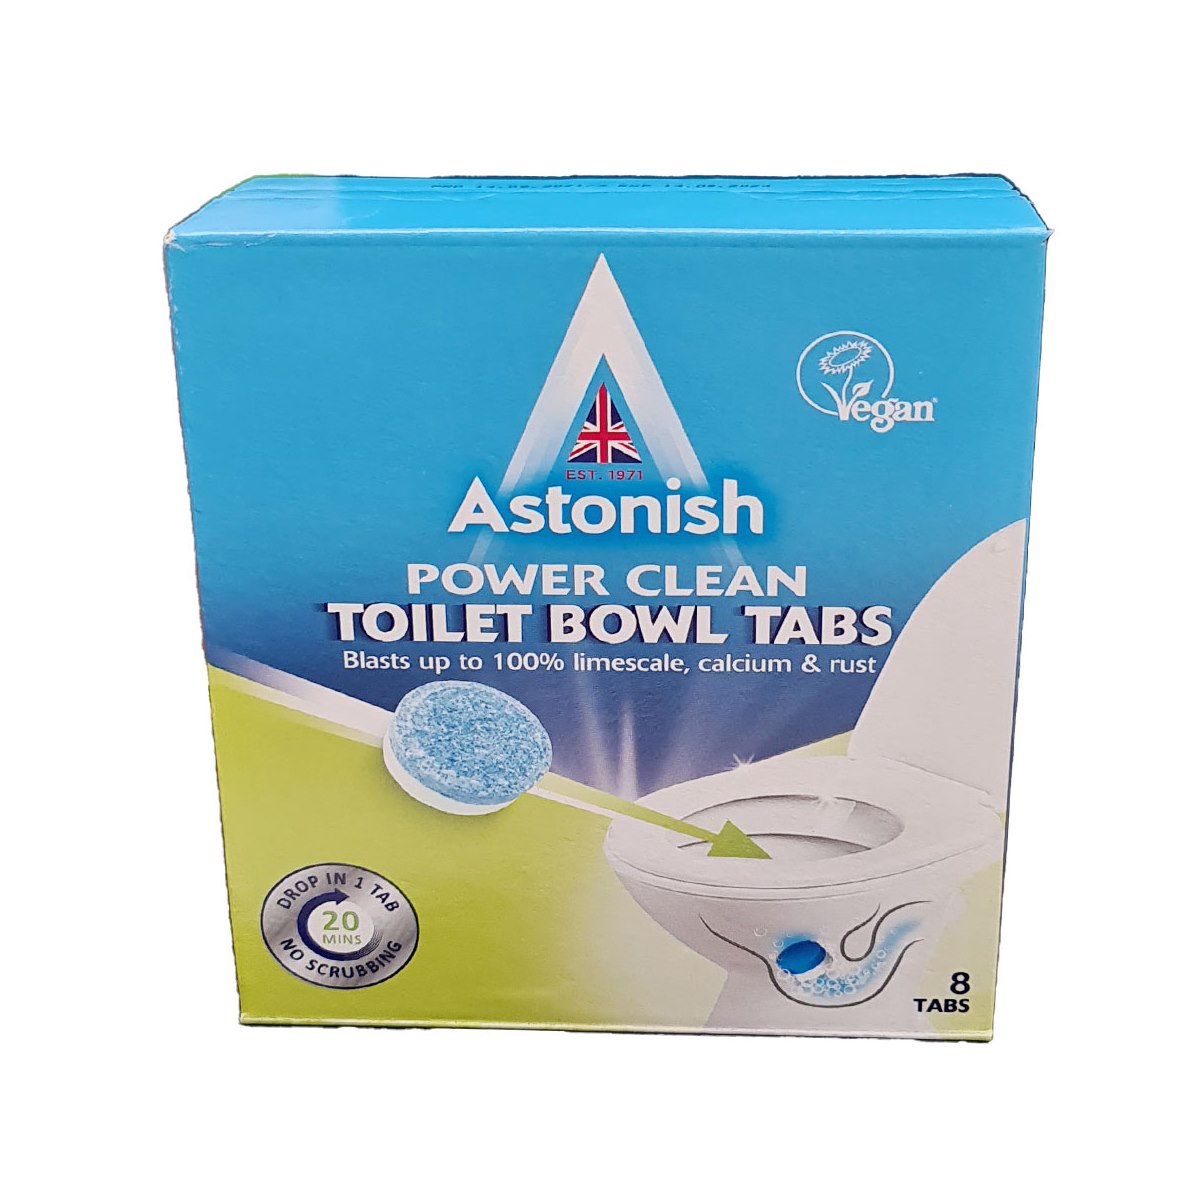 Astonish Power Clean Toilet Bowl Cleaner Tablets Pack of 8